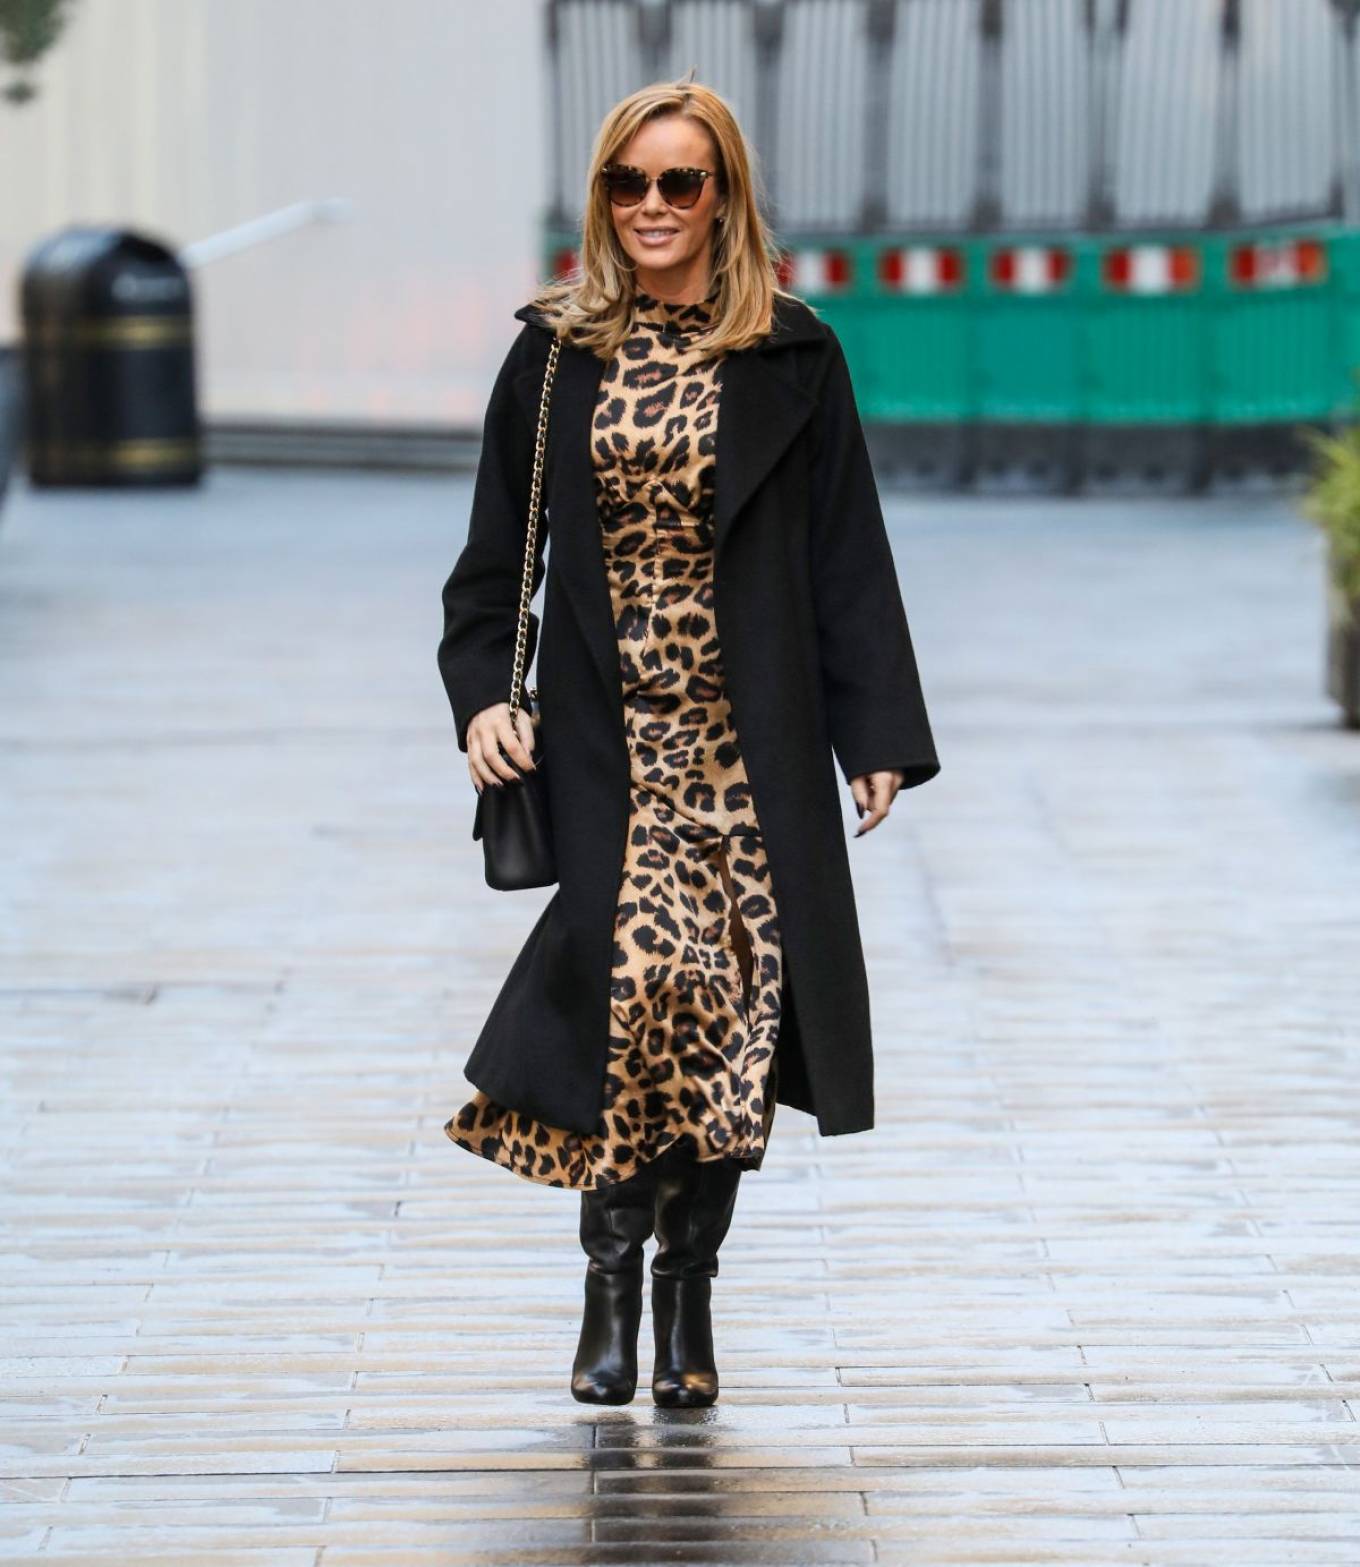 Amanda Holden 2020 : Amanda Holden – out and about in London -09